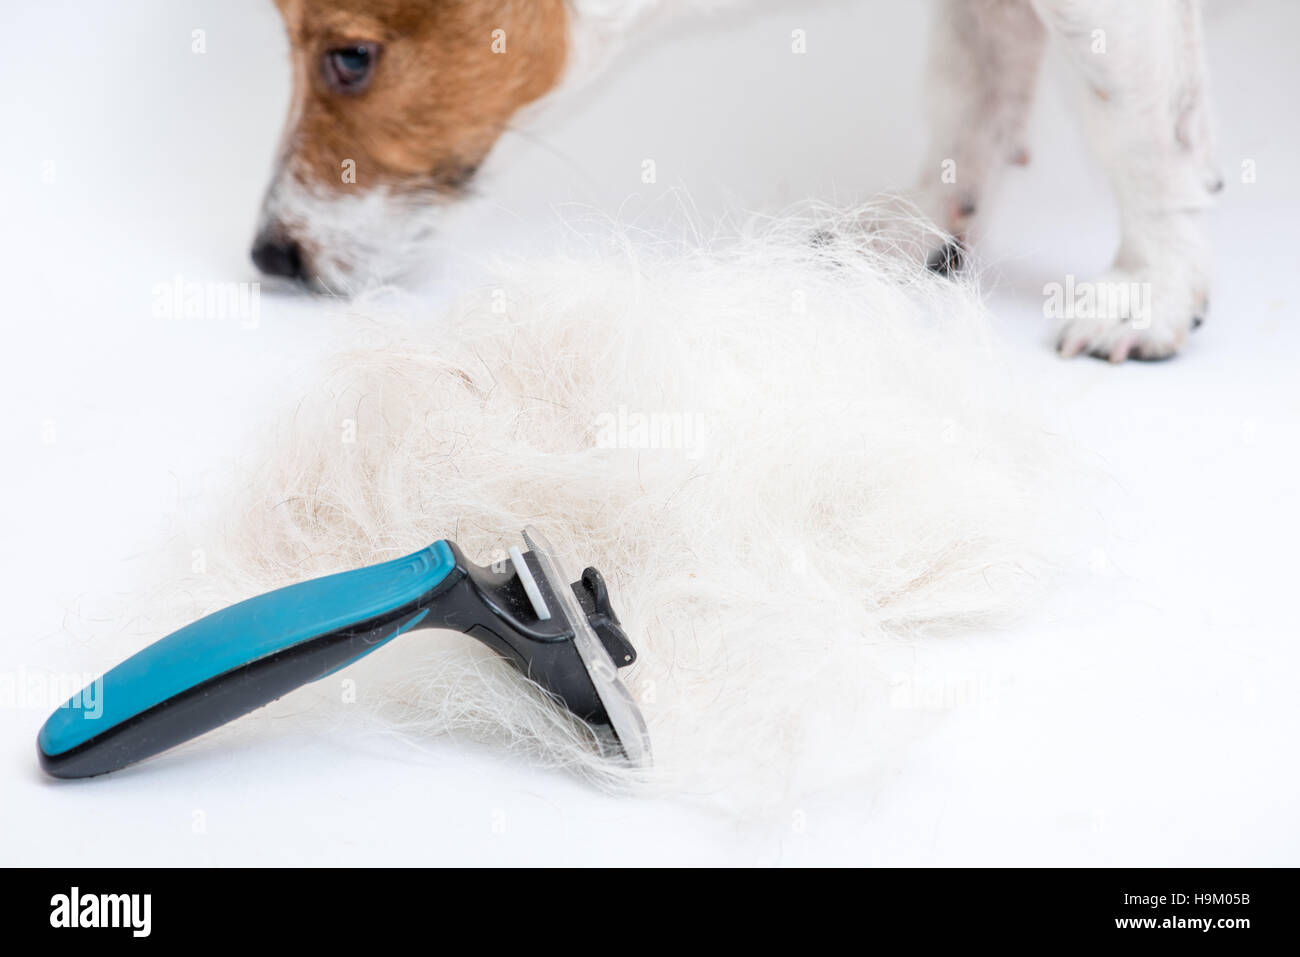 Grooming brush and heap of animal hair with dog at background Stock Photo